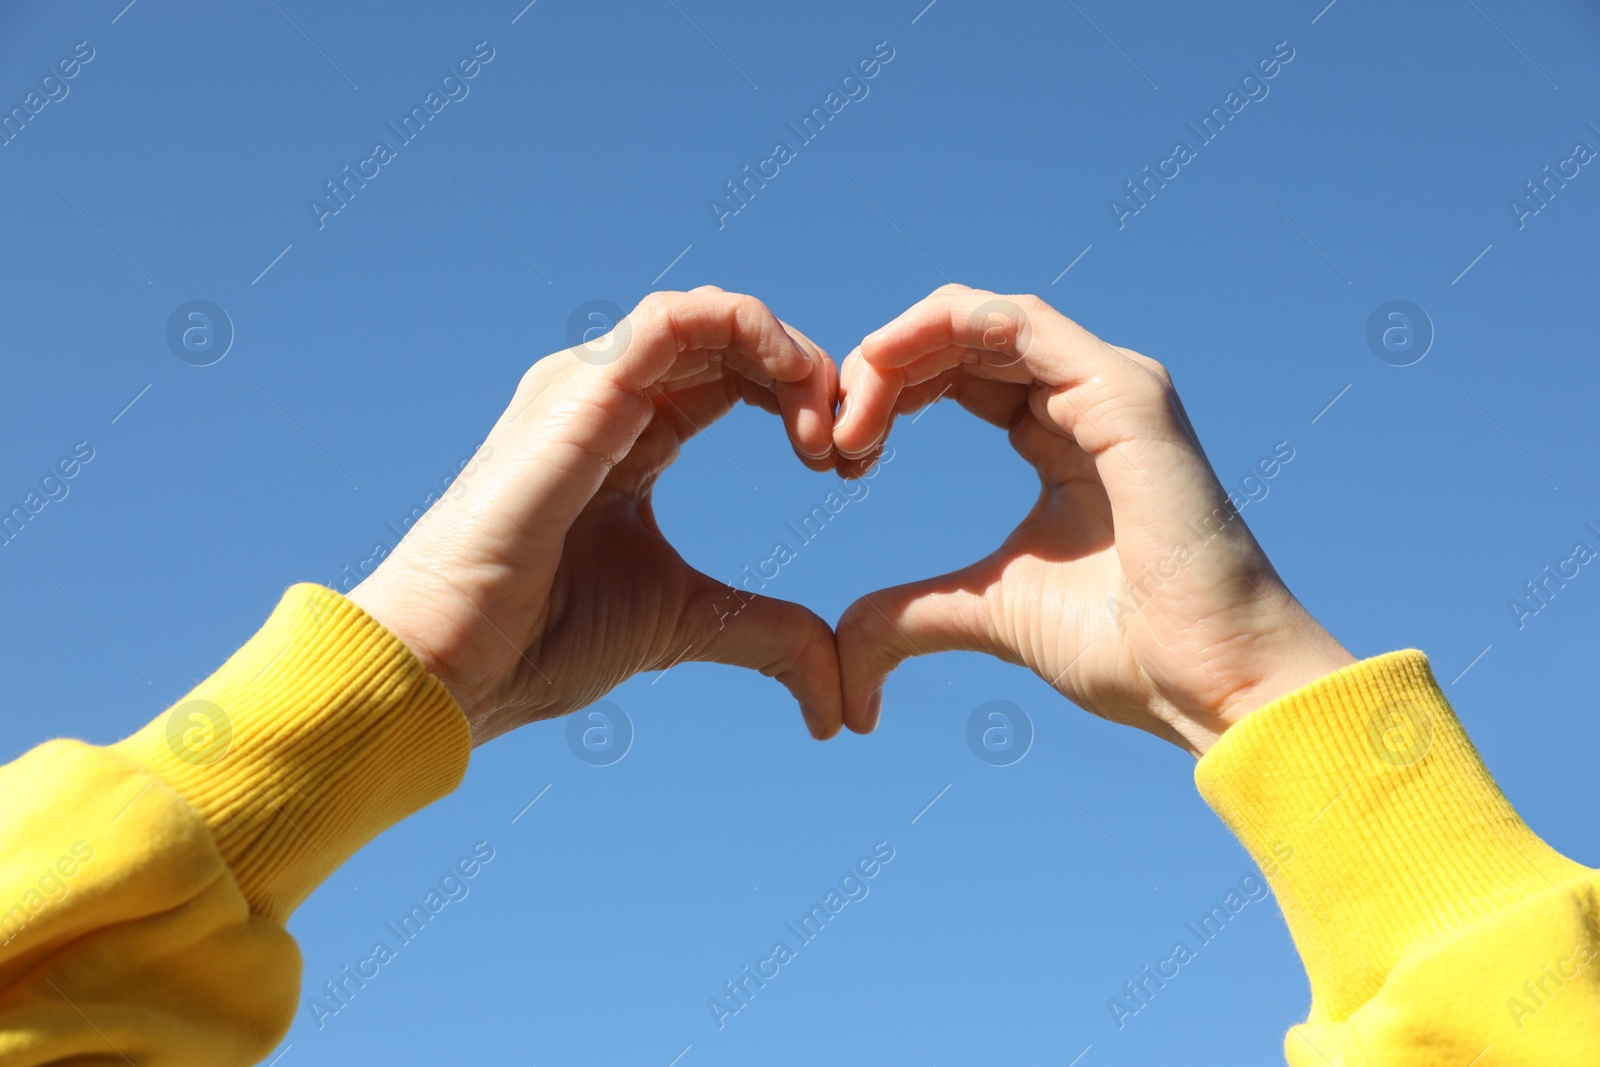 Photo of Woman showing heart against blue sky outdoors on sunny day, closeup of hands